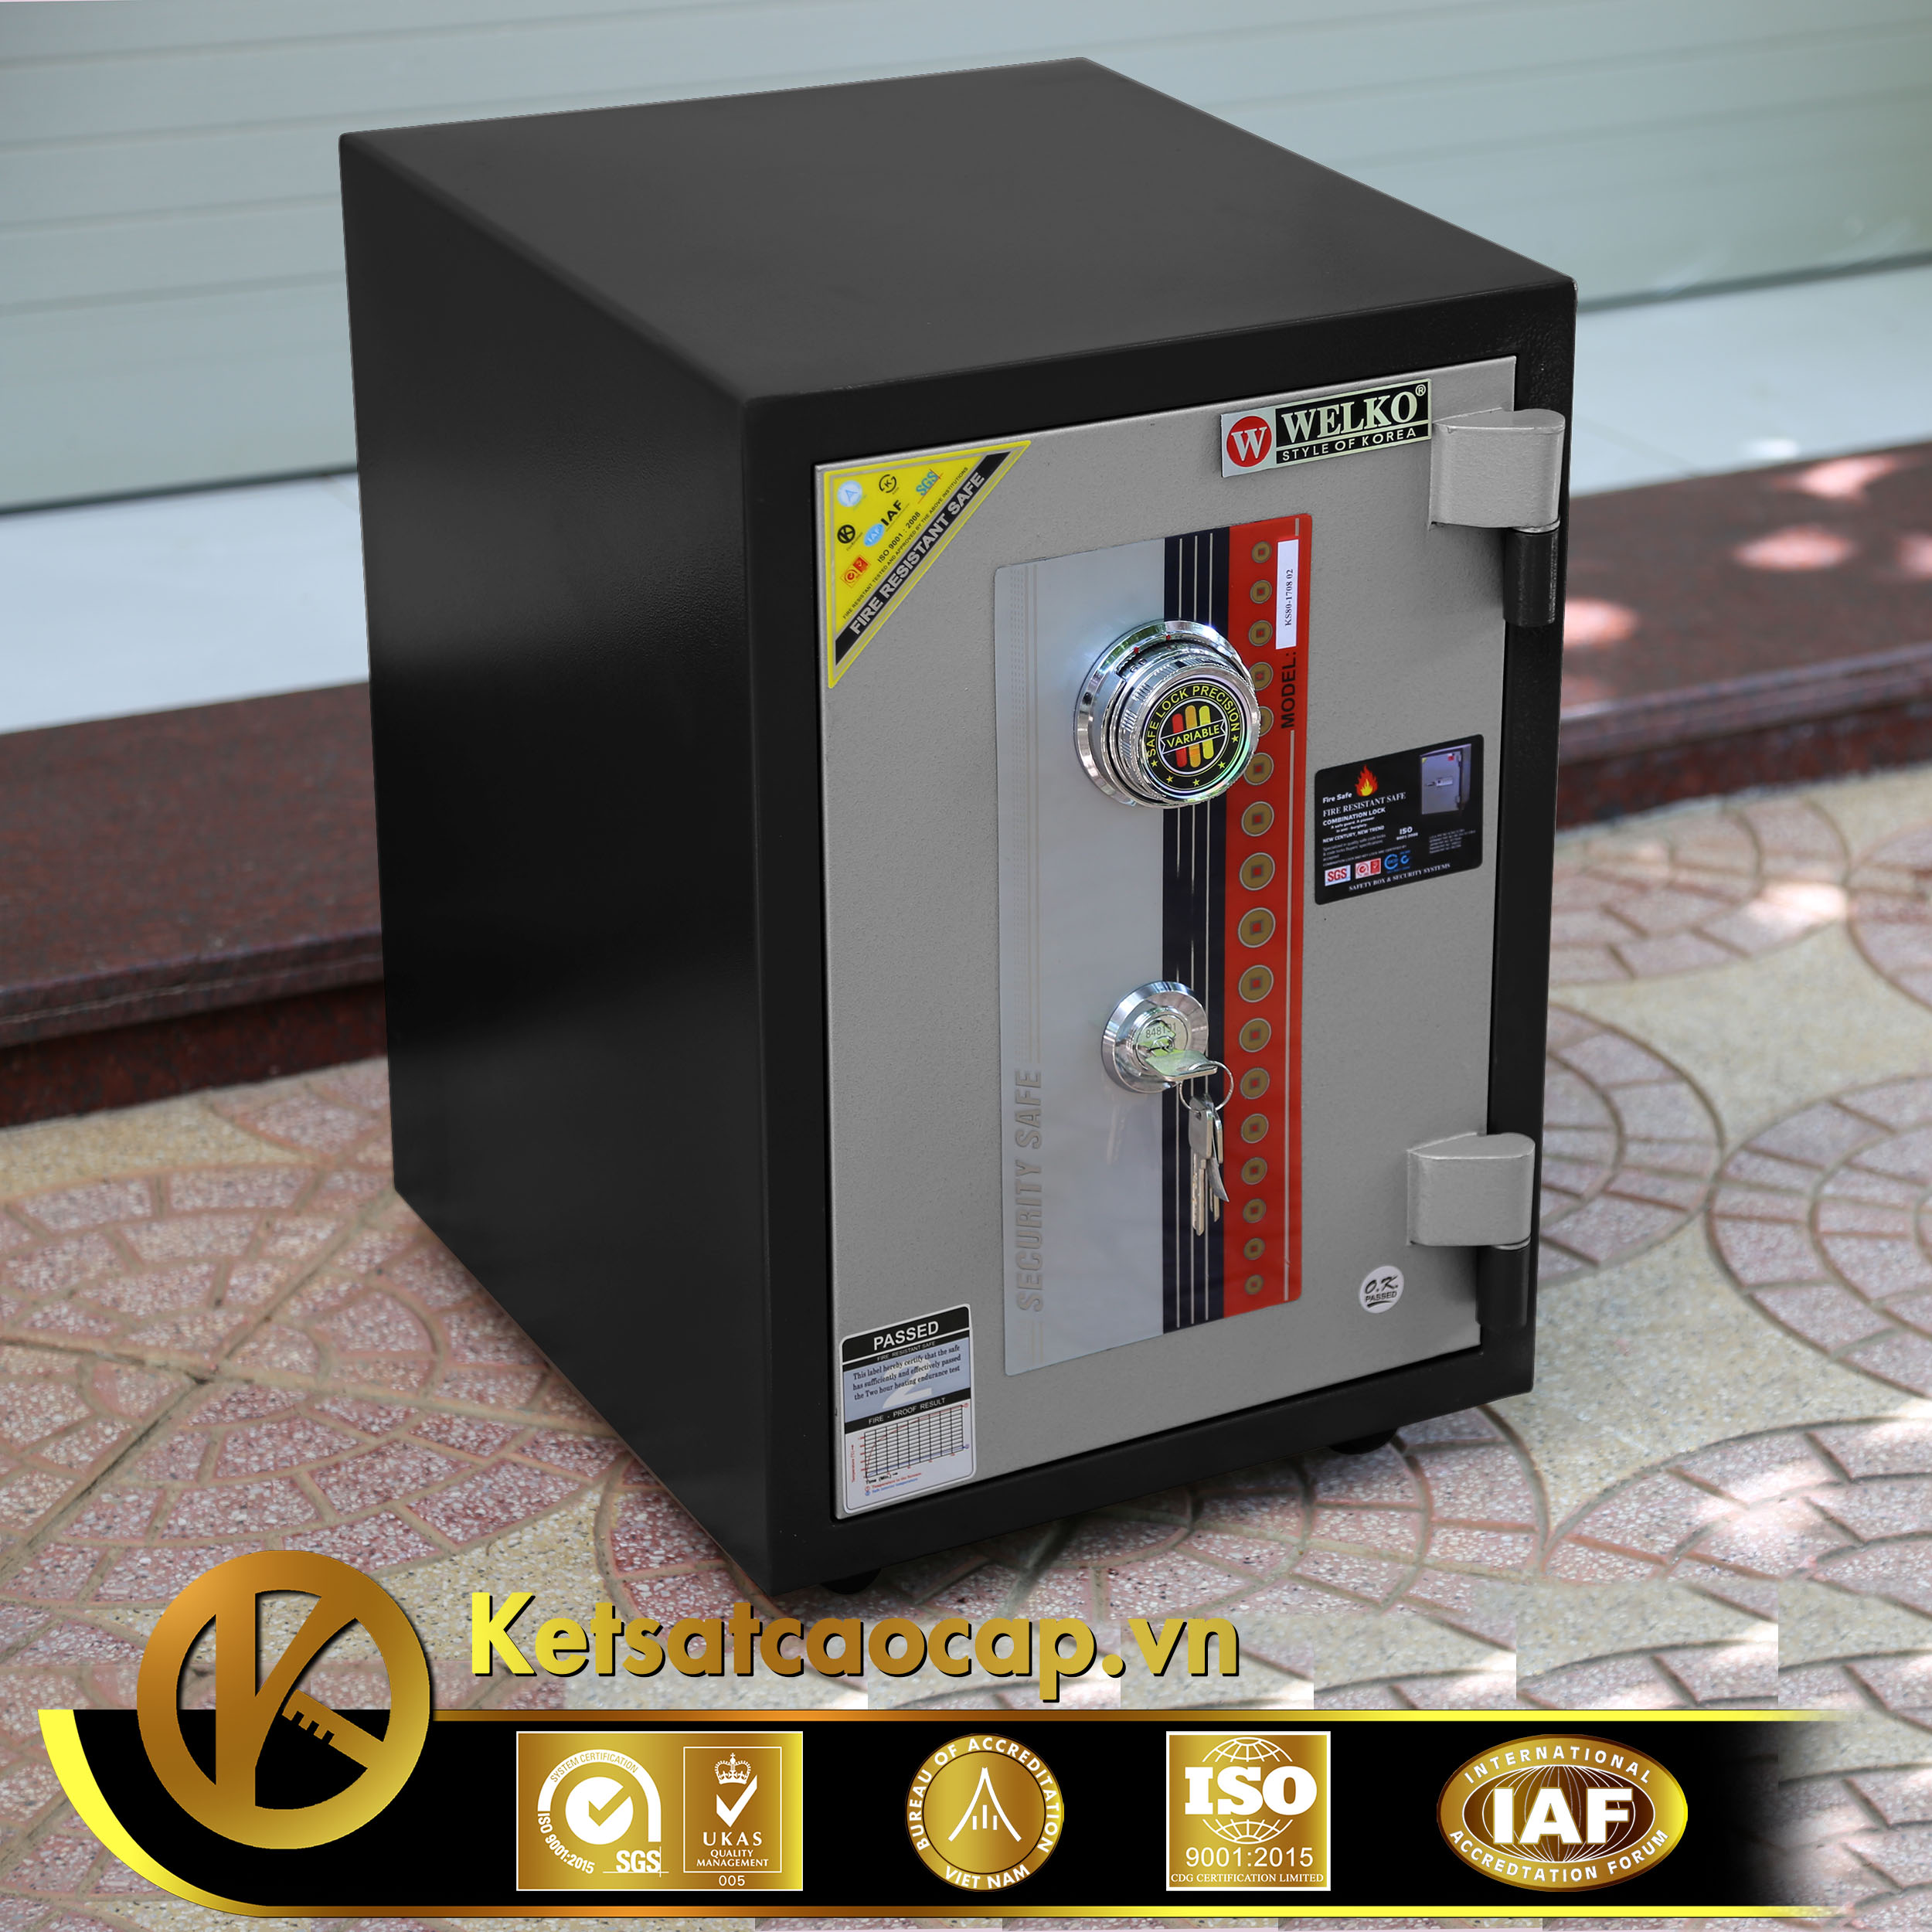 Best Sellers In Hotel Safes authenticantion